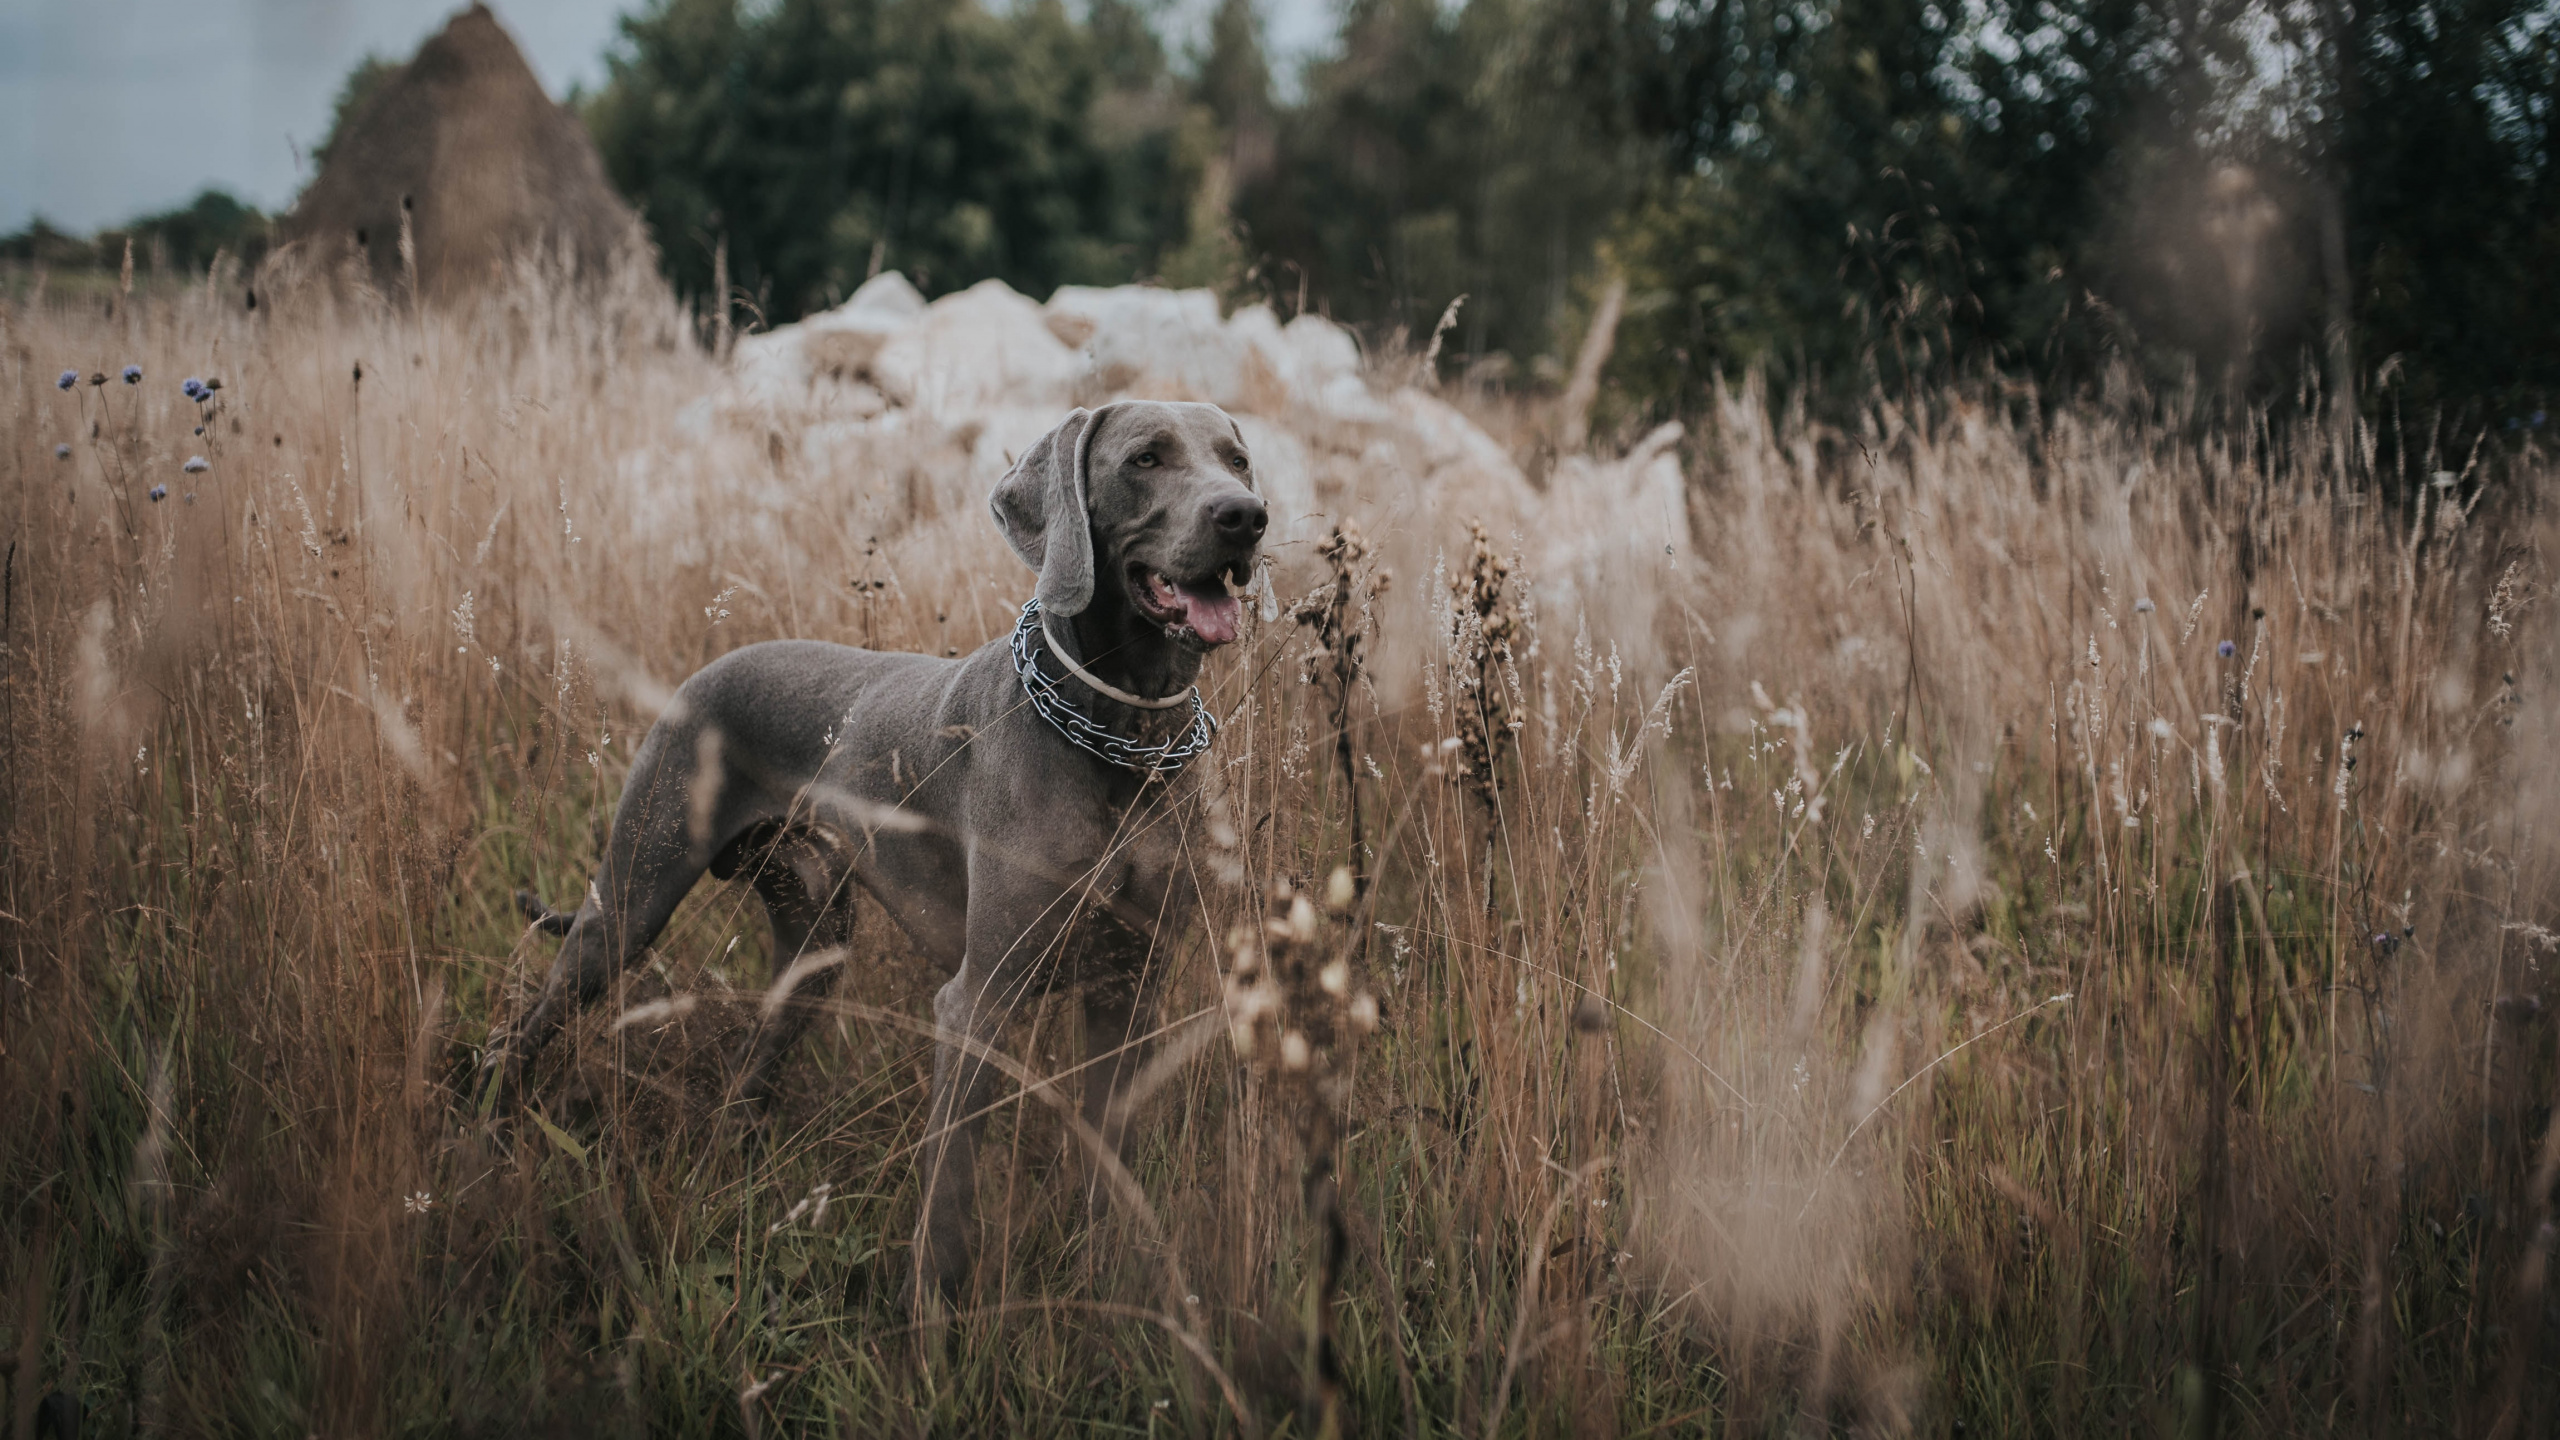 Gray Short Coated Dog on Brown Grass Field During Daytime. Wallpaper in 2560x1440 Resolution